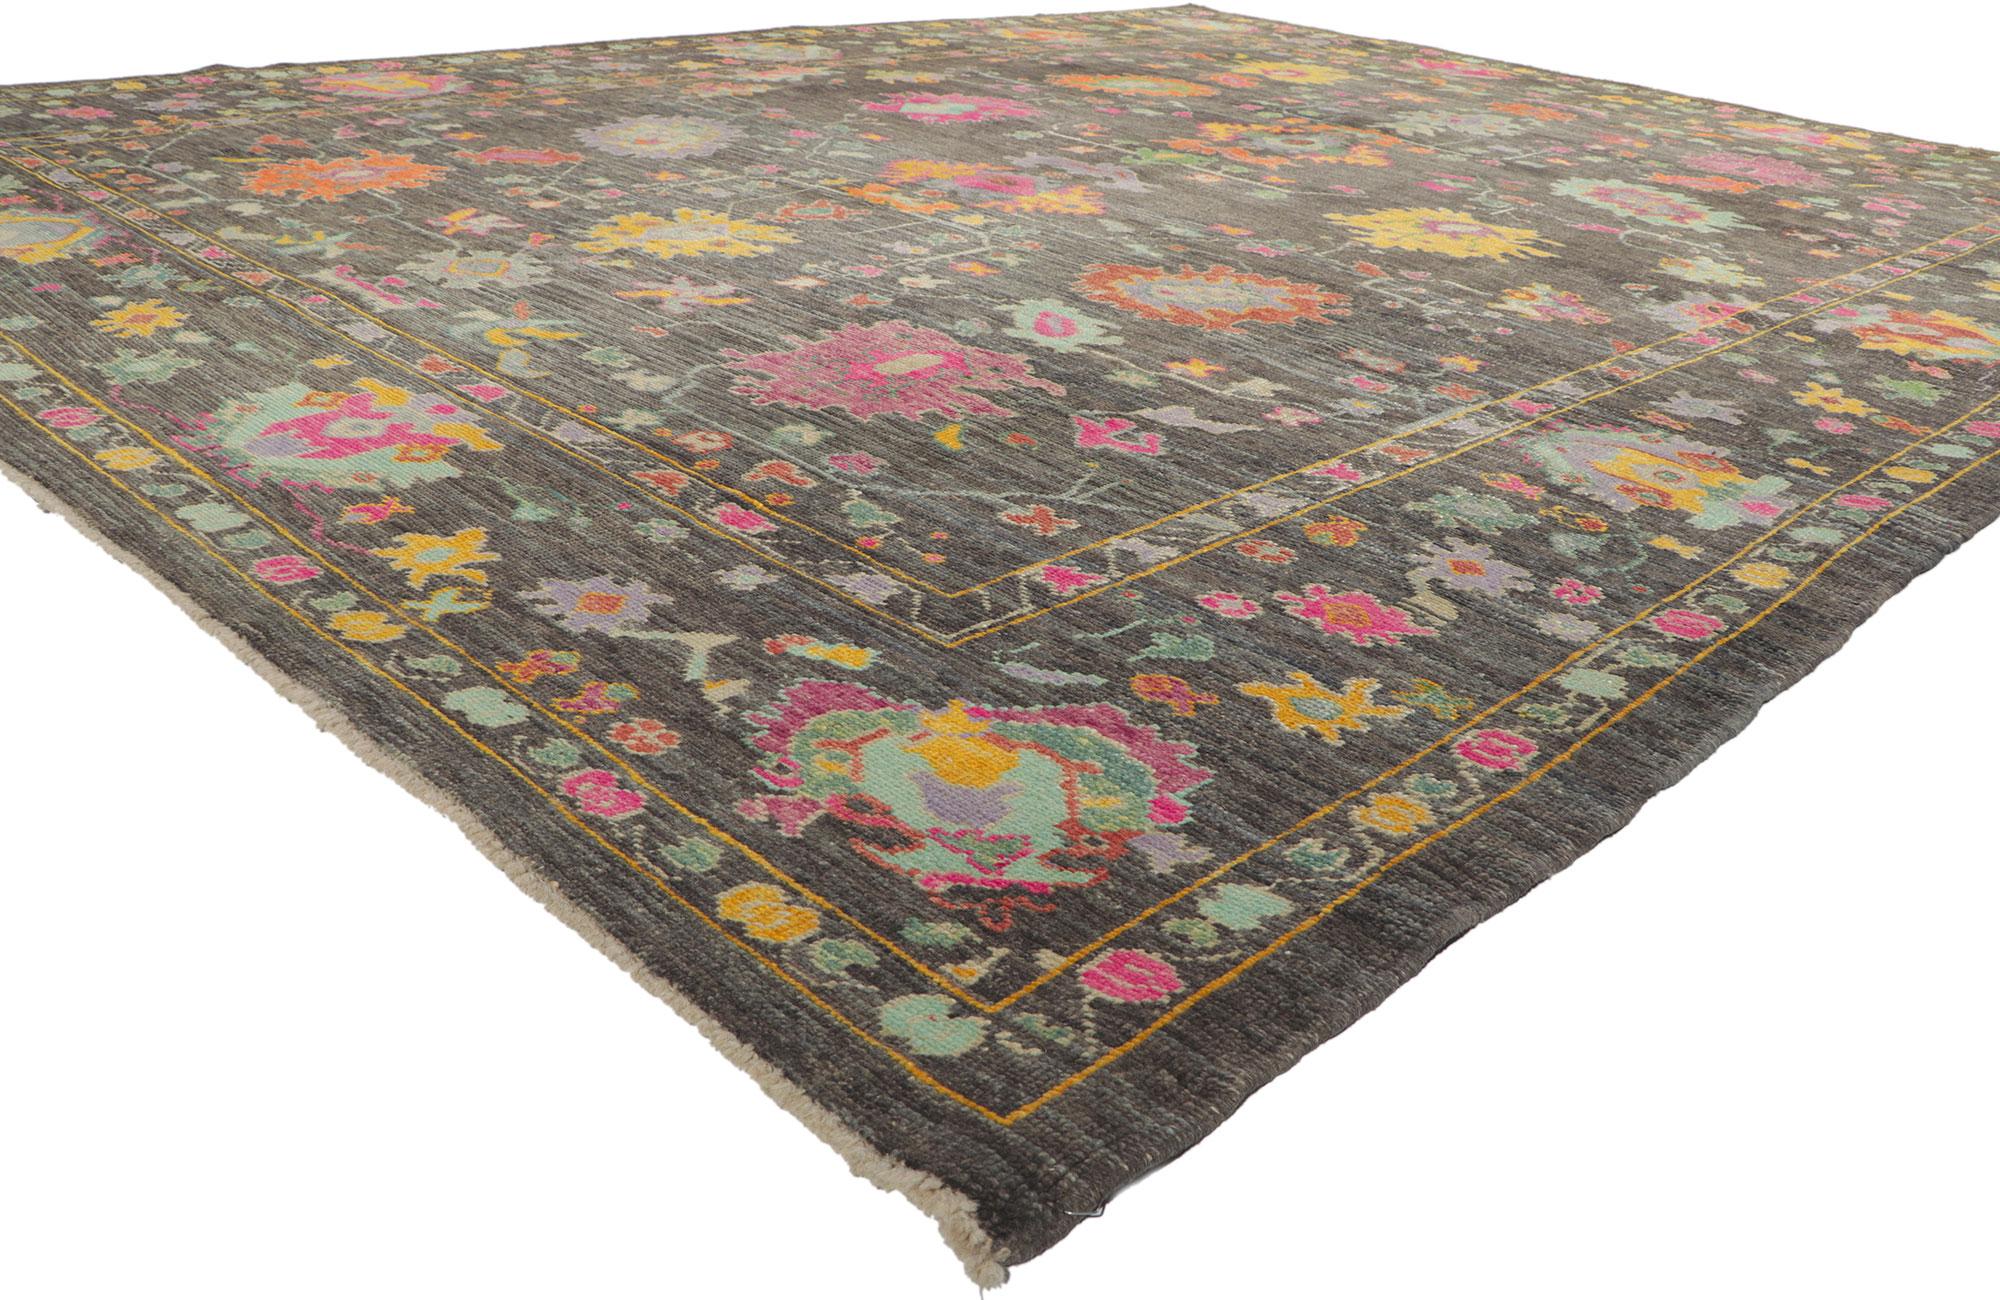 52218 New colorful Turkish Oushak Rug, 10.02 x 13.00.
Emanating modern style with incredible detail and texture, this hand knotted wool Turkish Oushak rug is a captivating vision of woven beauty. The eye-catching botanical design and lively colors